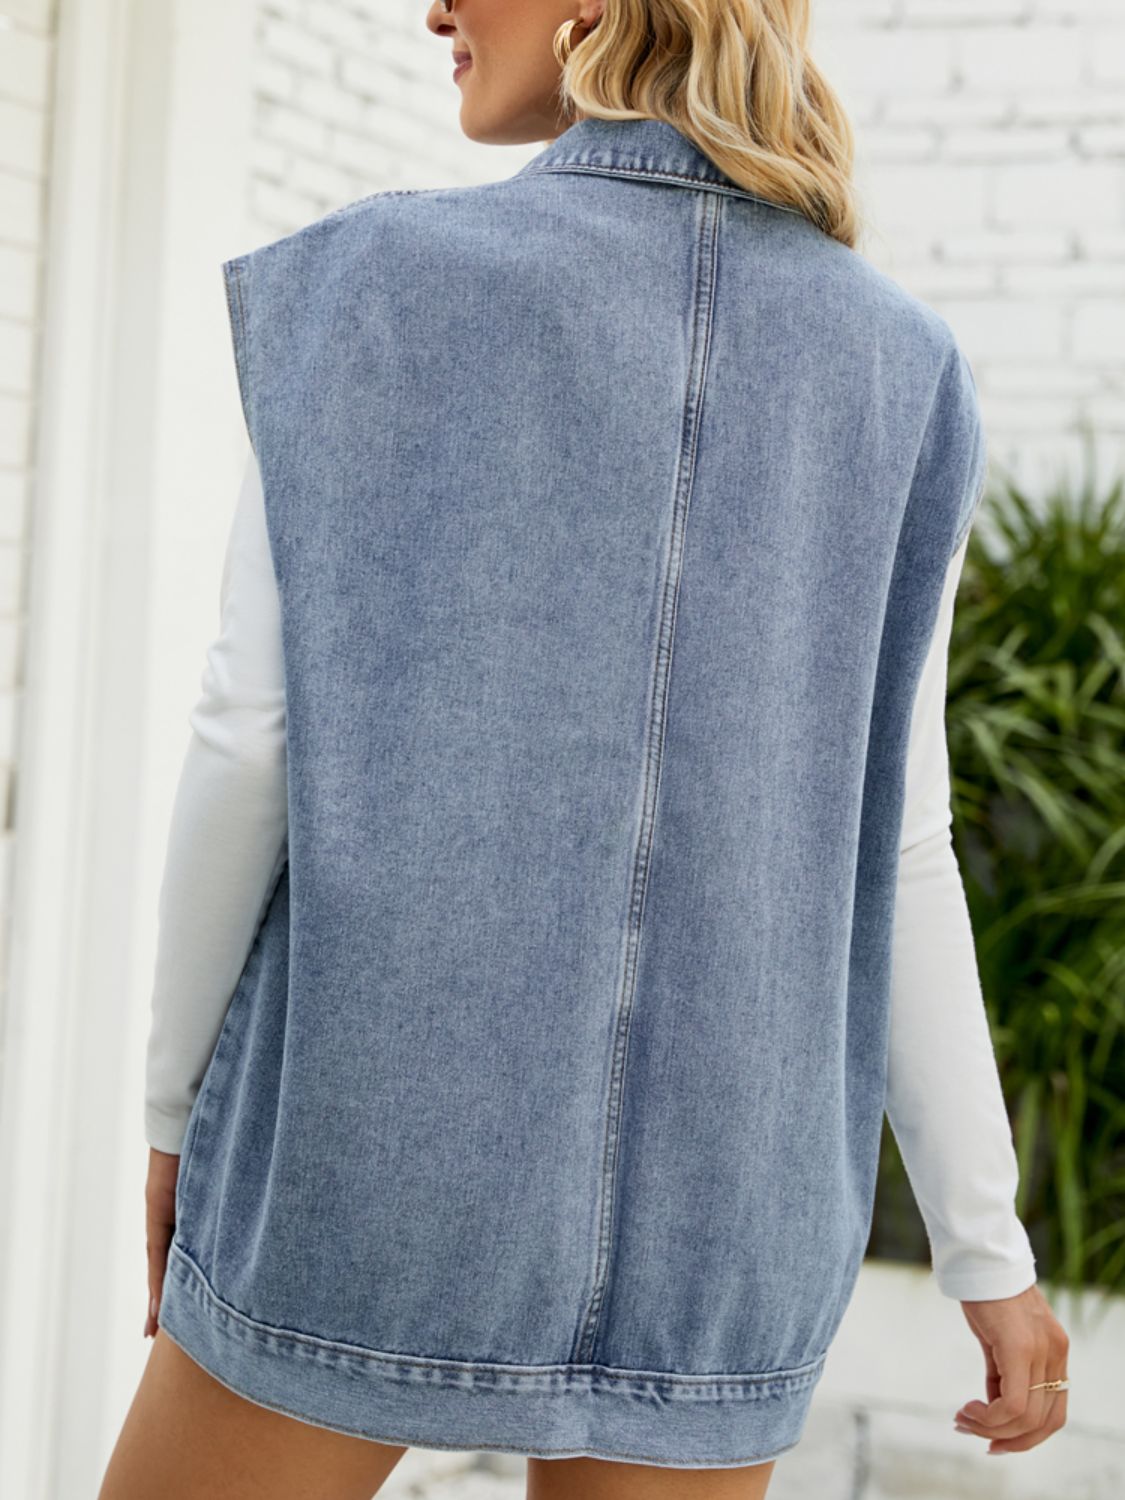 Light Slate Gray Collared Neck Sleeveless Denim Top with Pockets Sentient Beauty Fashions Apparel &amp; Accessories